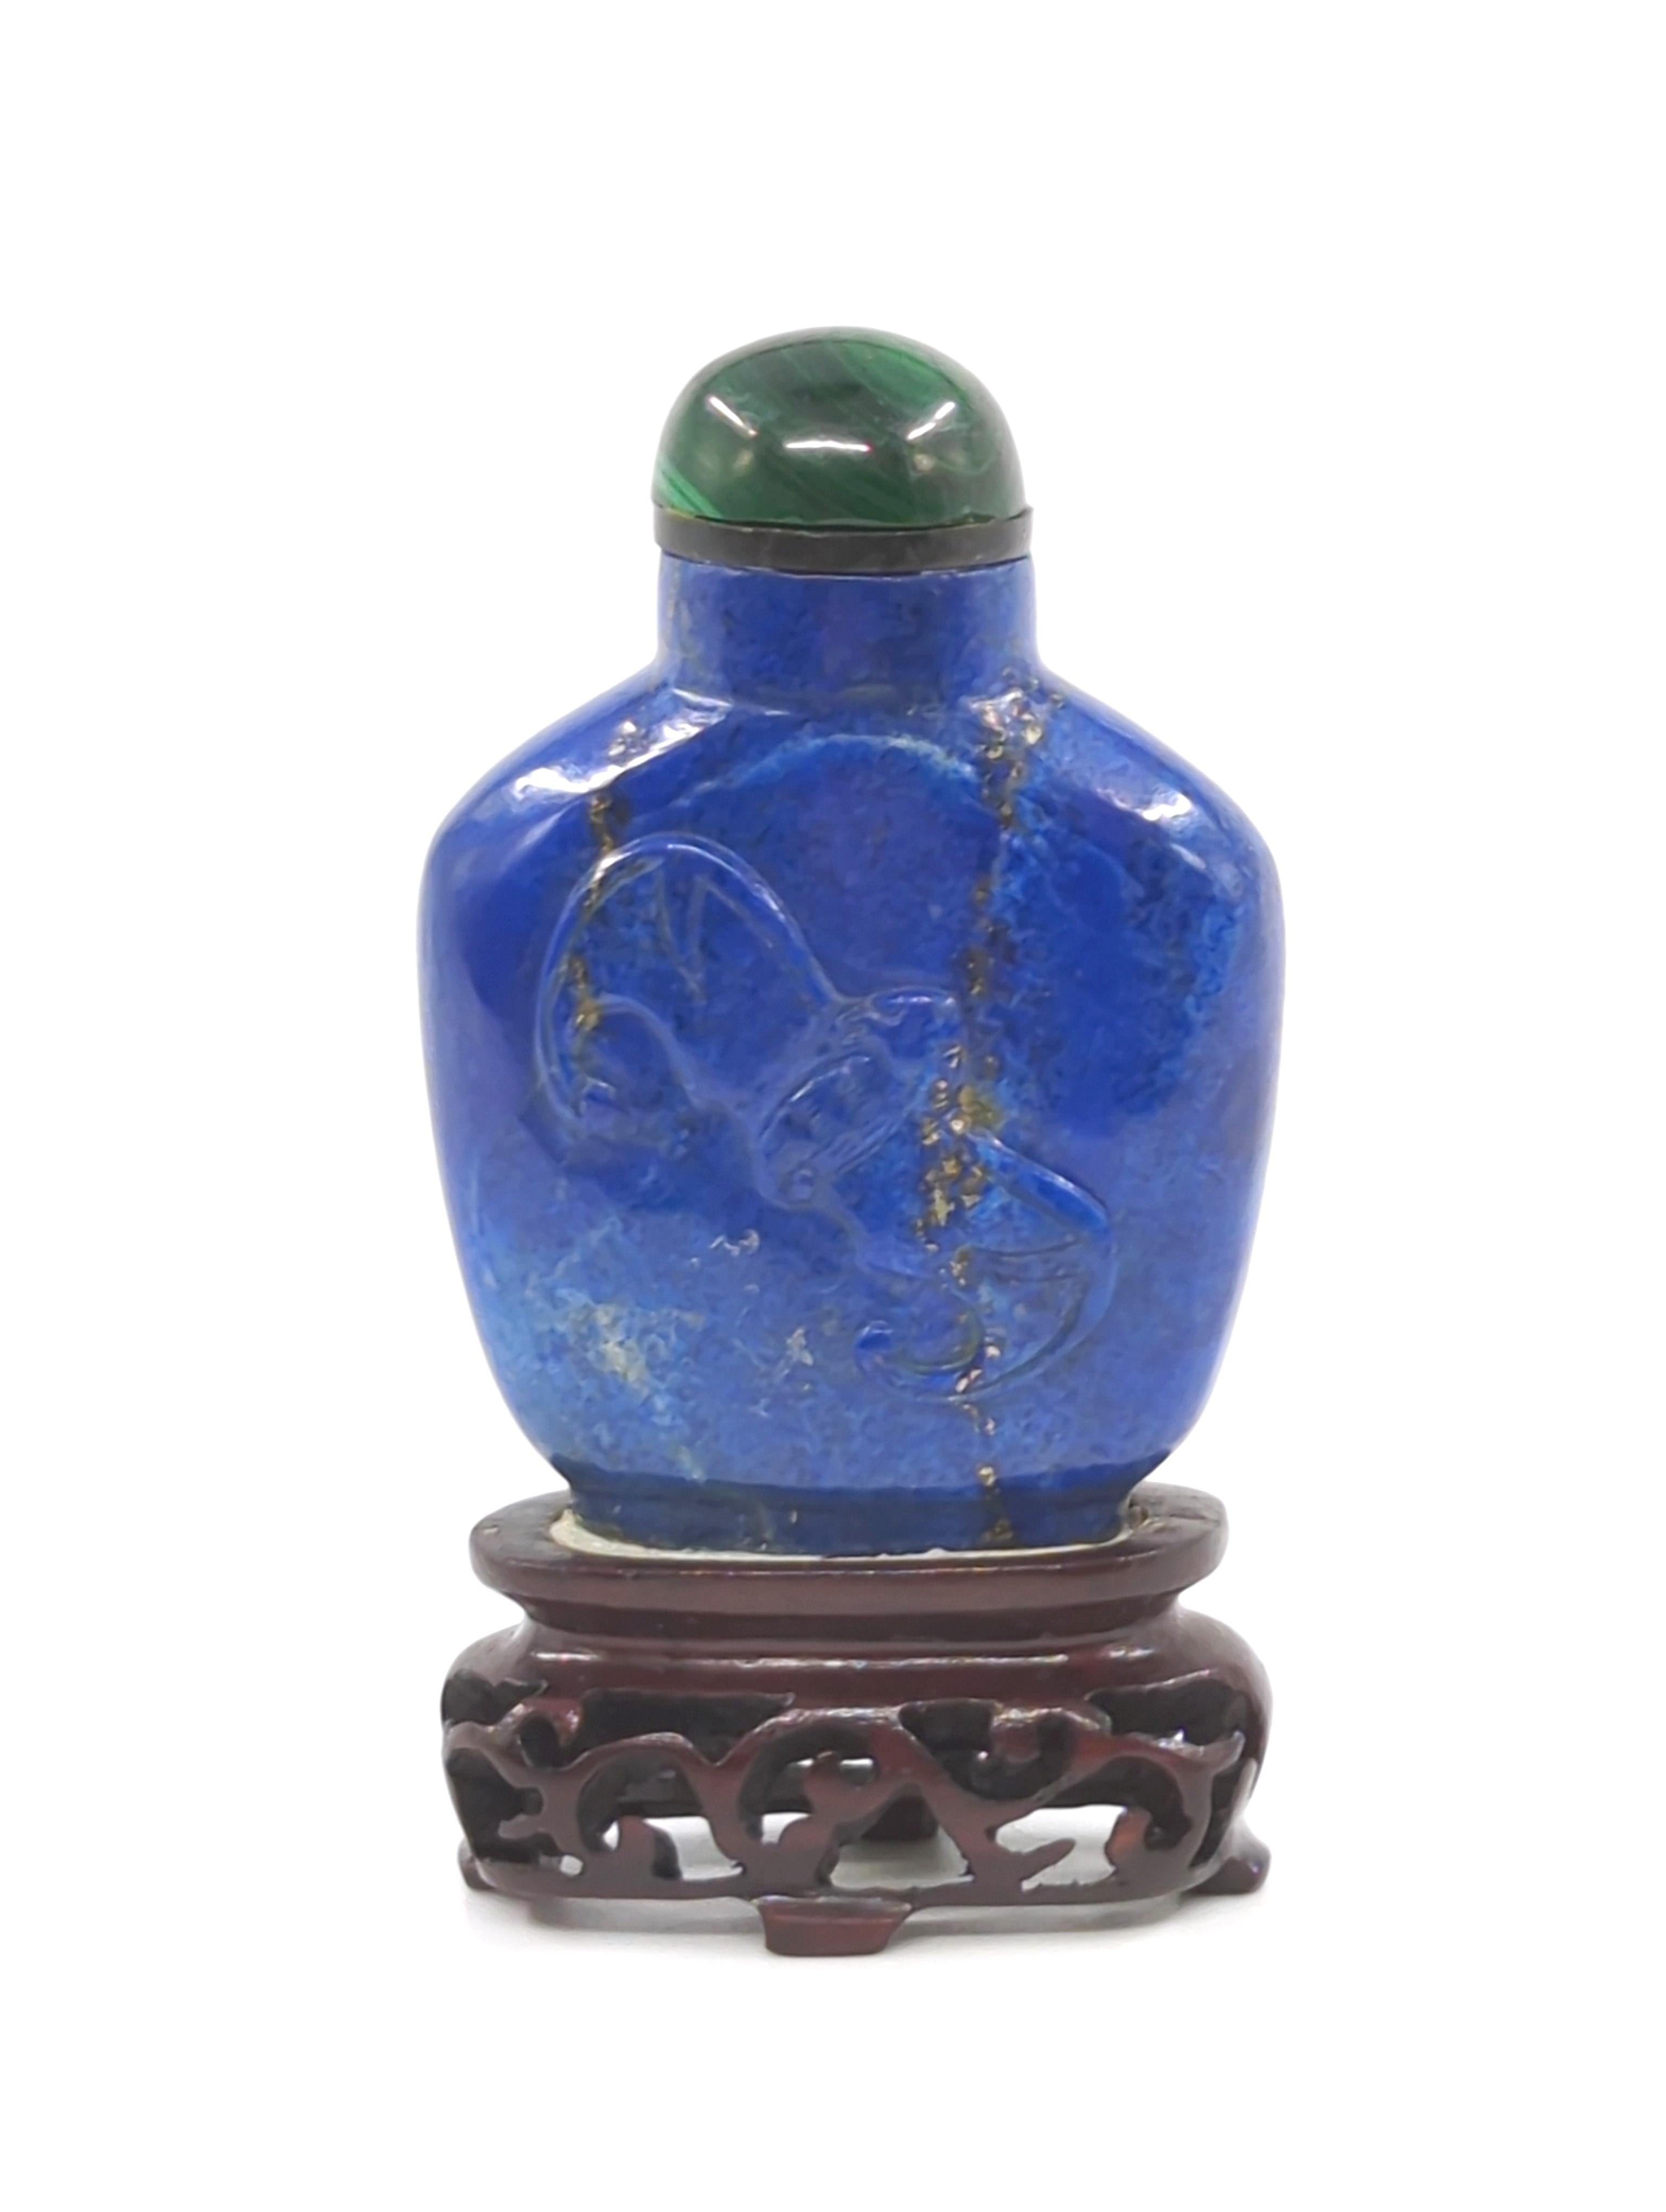 Antique Chinese Lapis Lazuli Relief Carved Snuff Bottle on Stand c.1920 For Sale 6